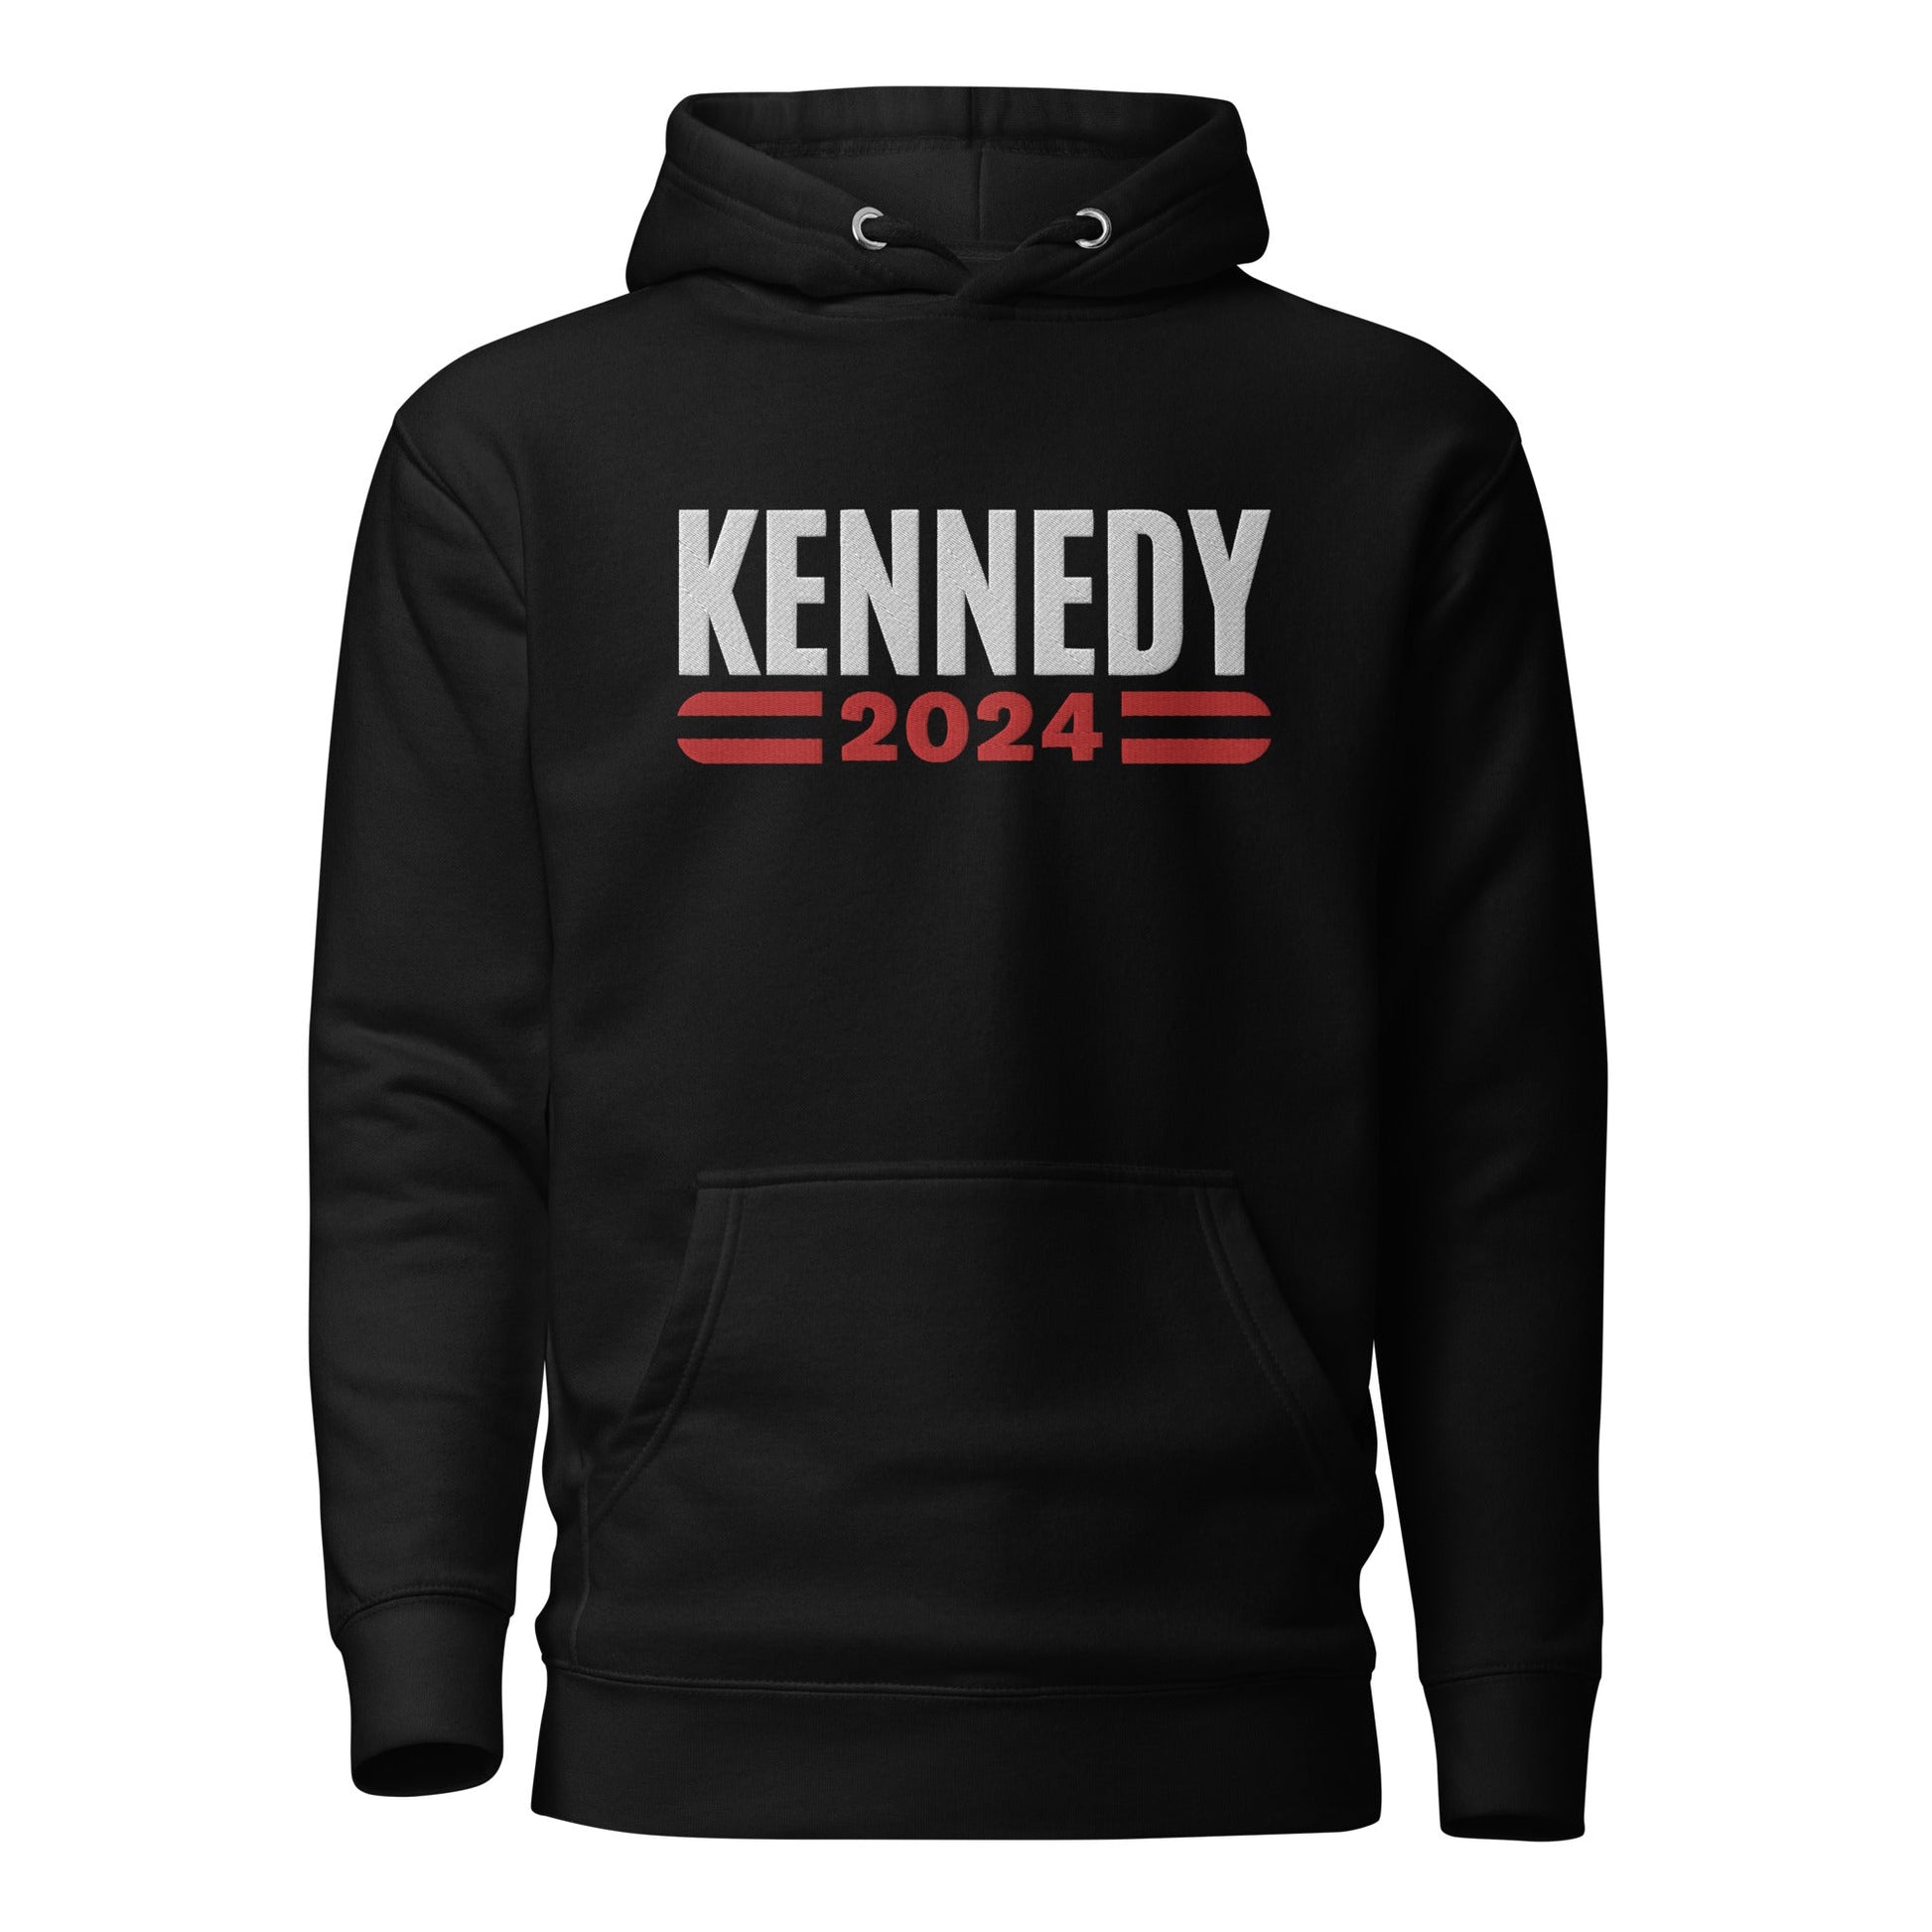 Kennedy Classic Unisex Hoodie - TEAM KENNEDY. All rights reserved